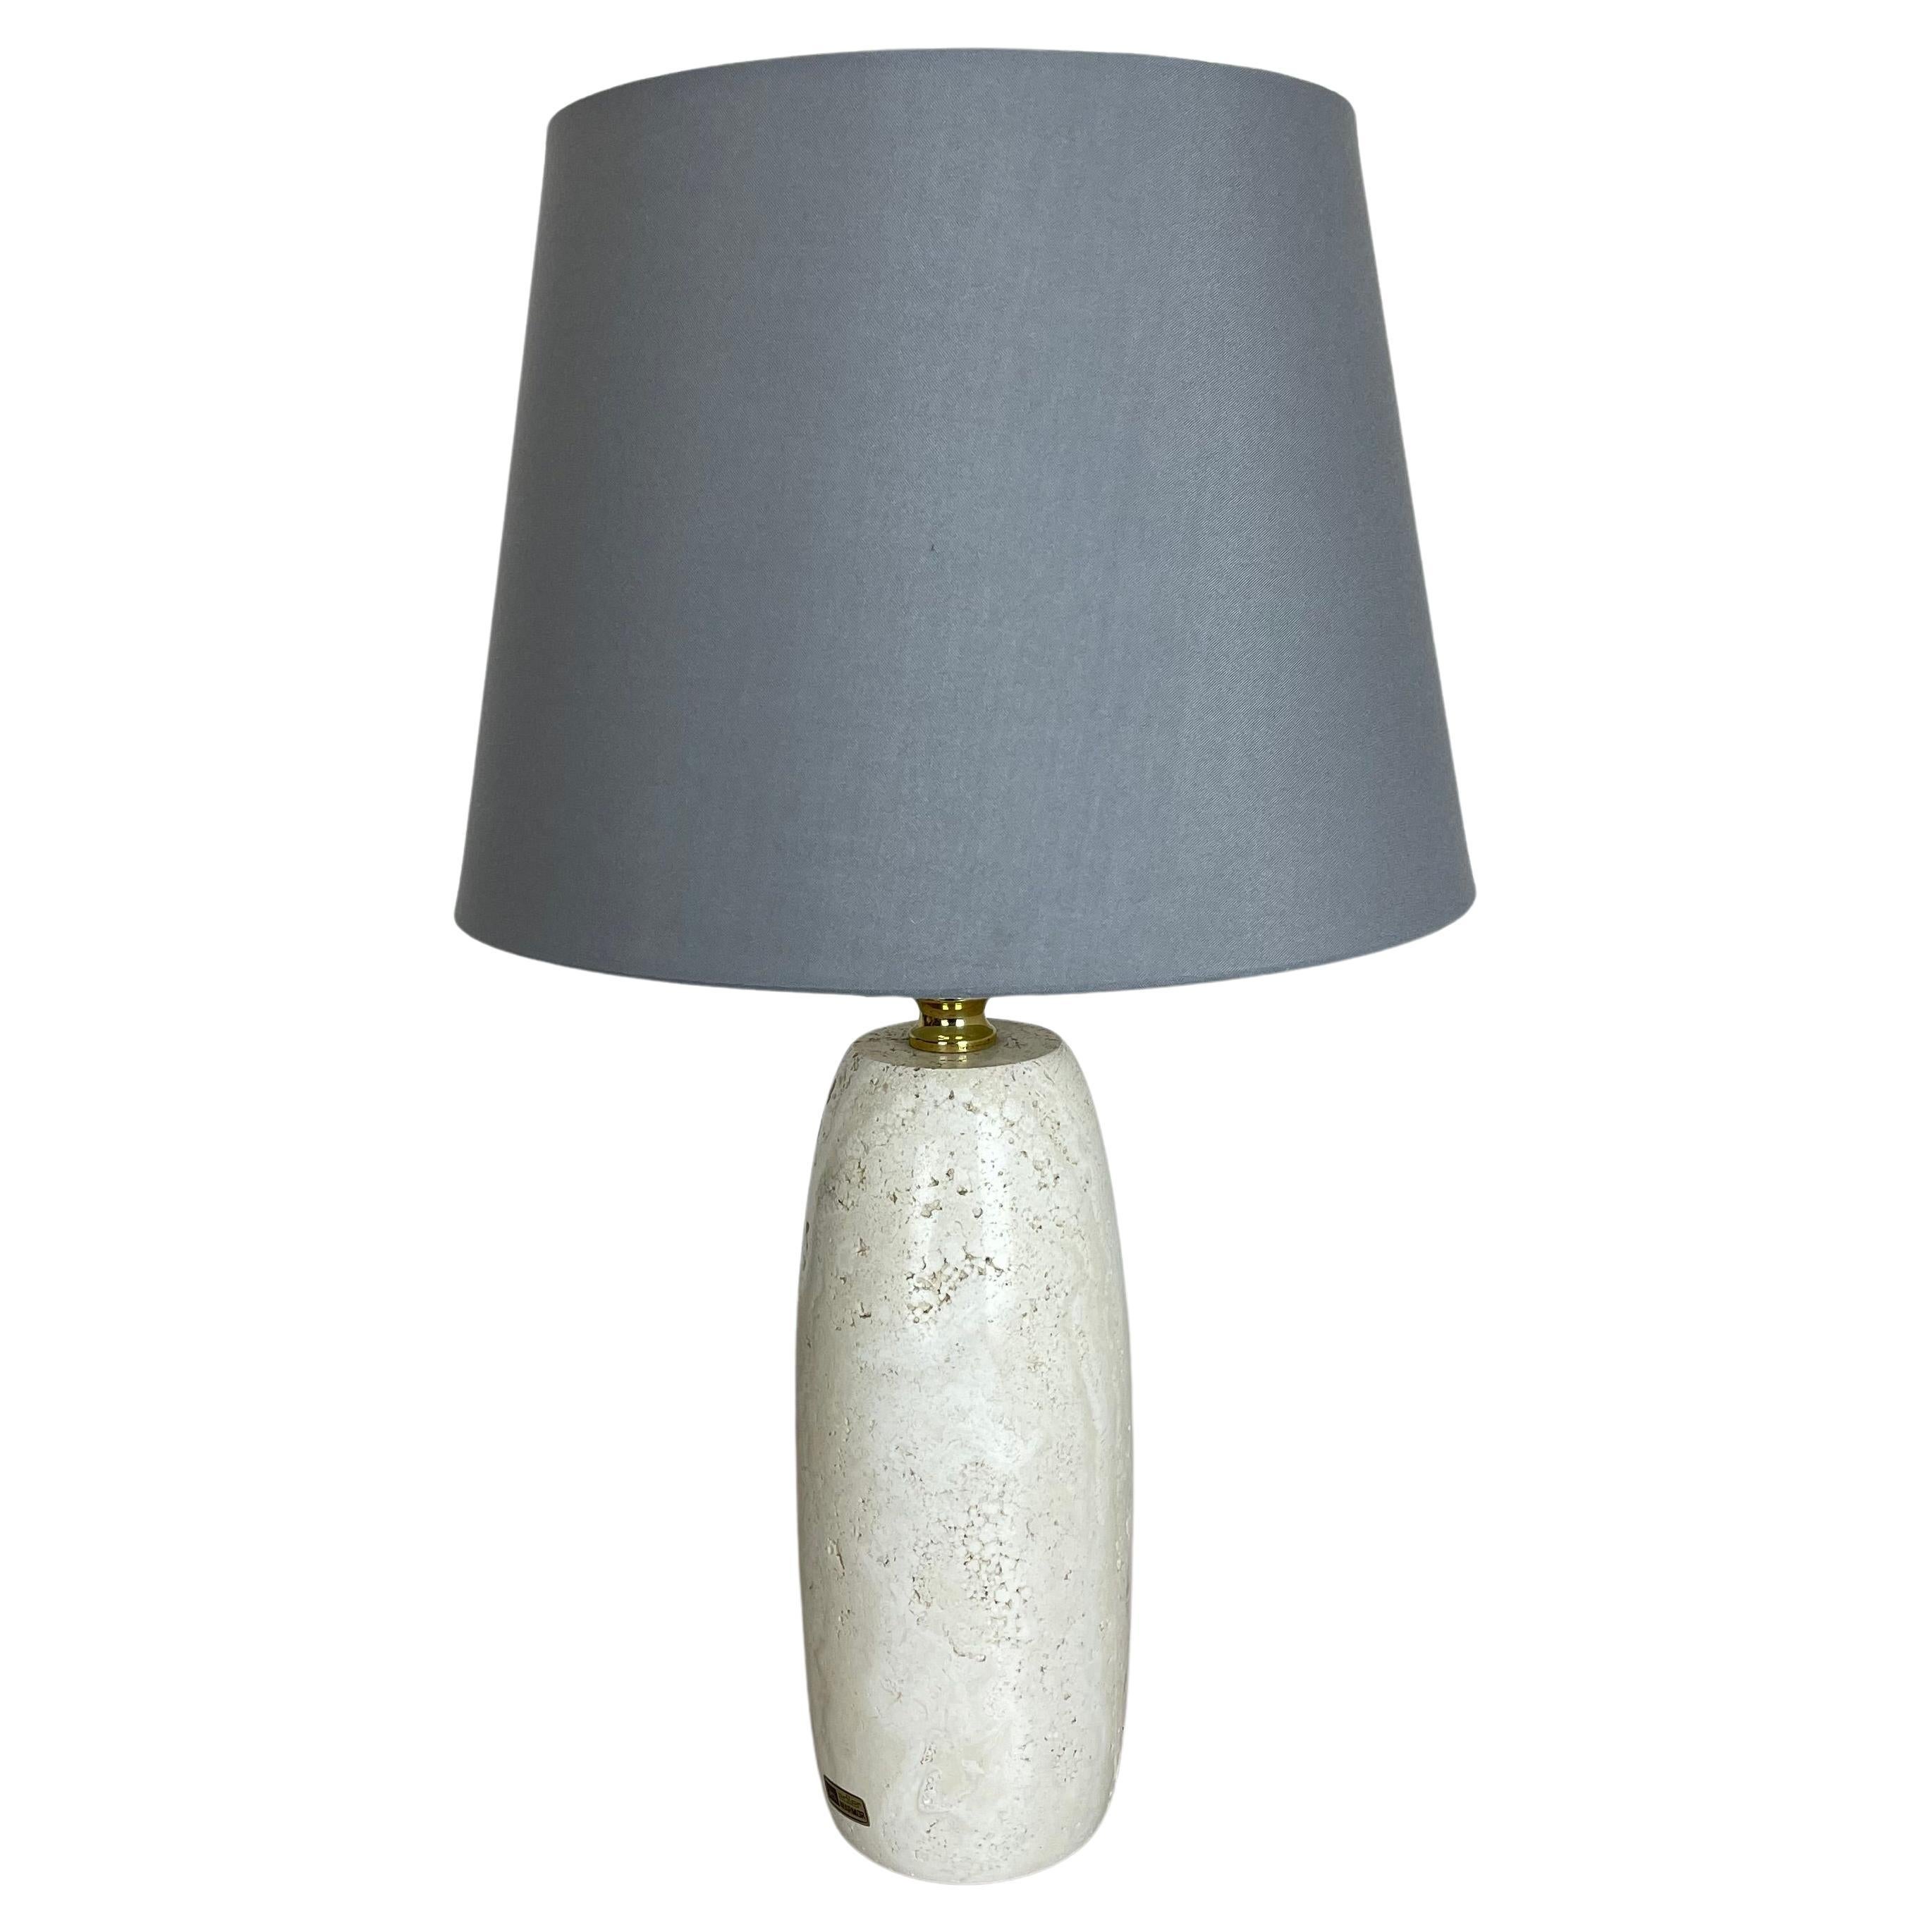 6.4kg Travertine Marble Fratelli Mannelli Style Table Light Base, Italy, 1970s For Sale